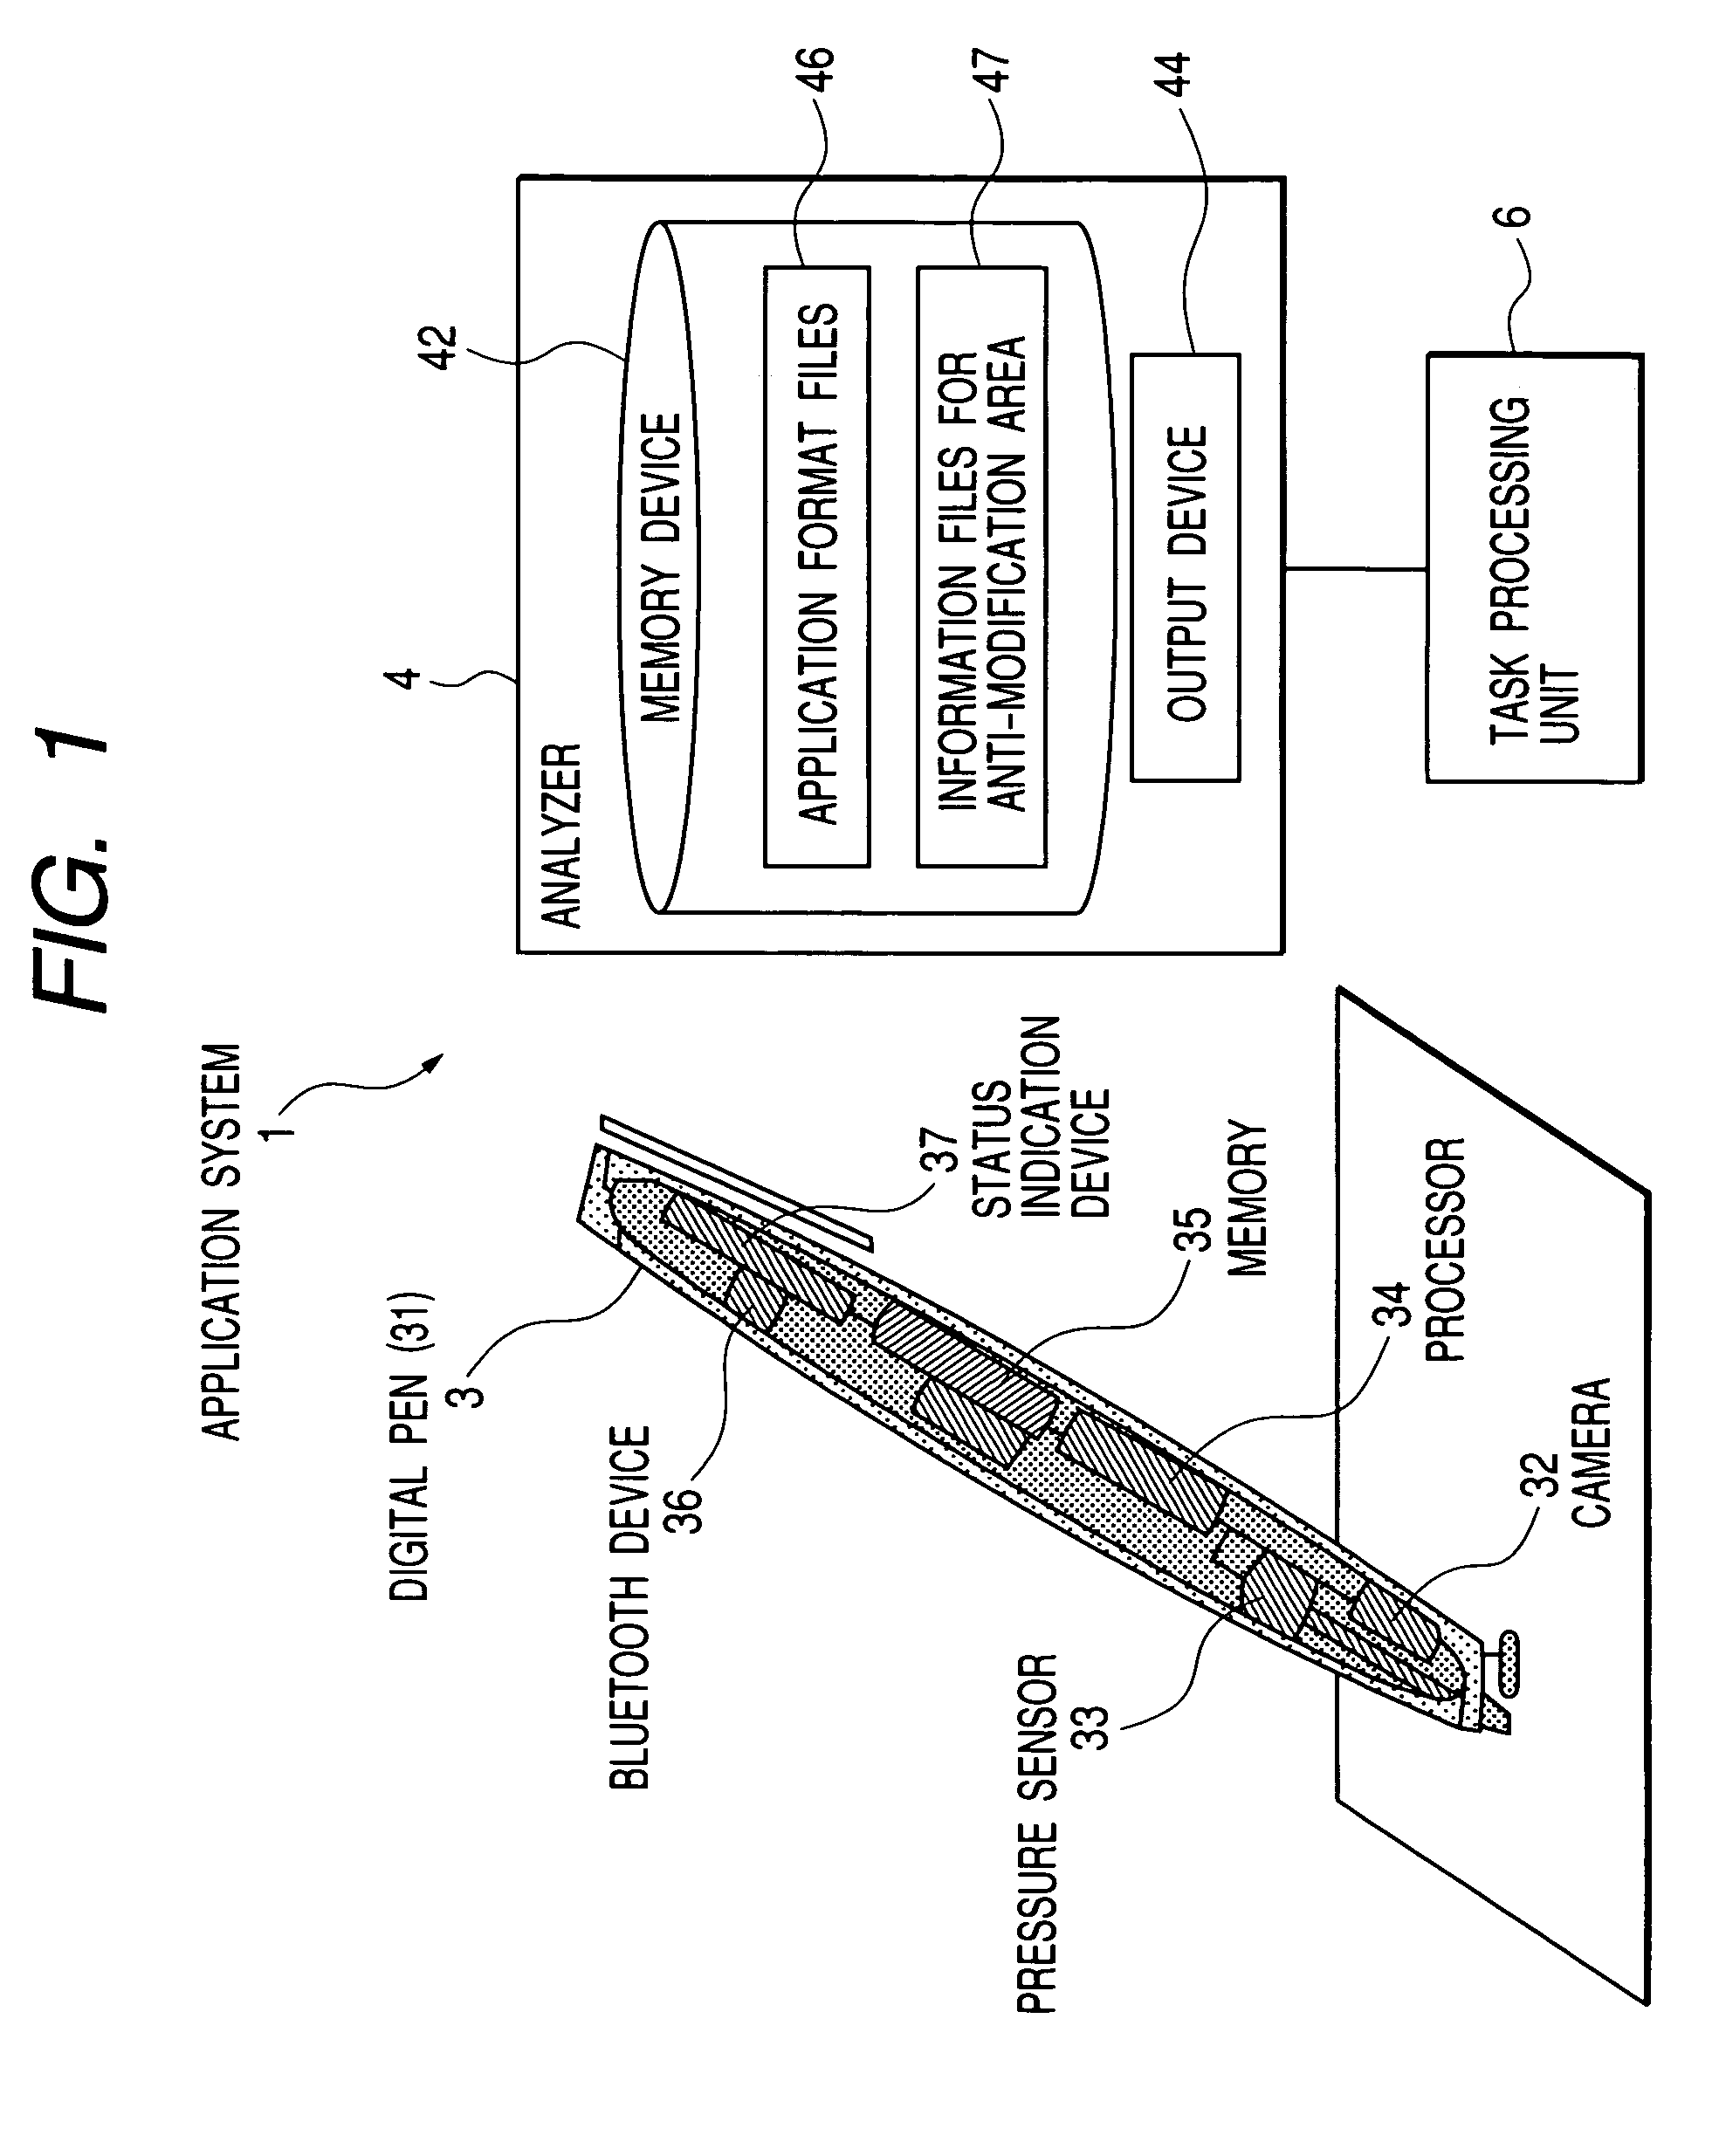 Application system with function for preventing modification